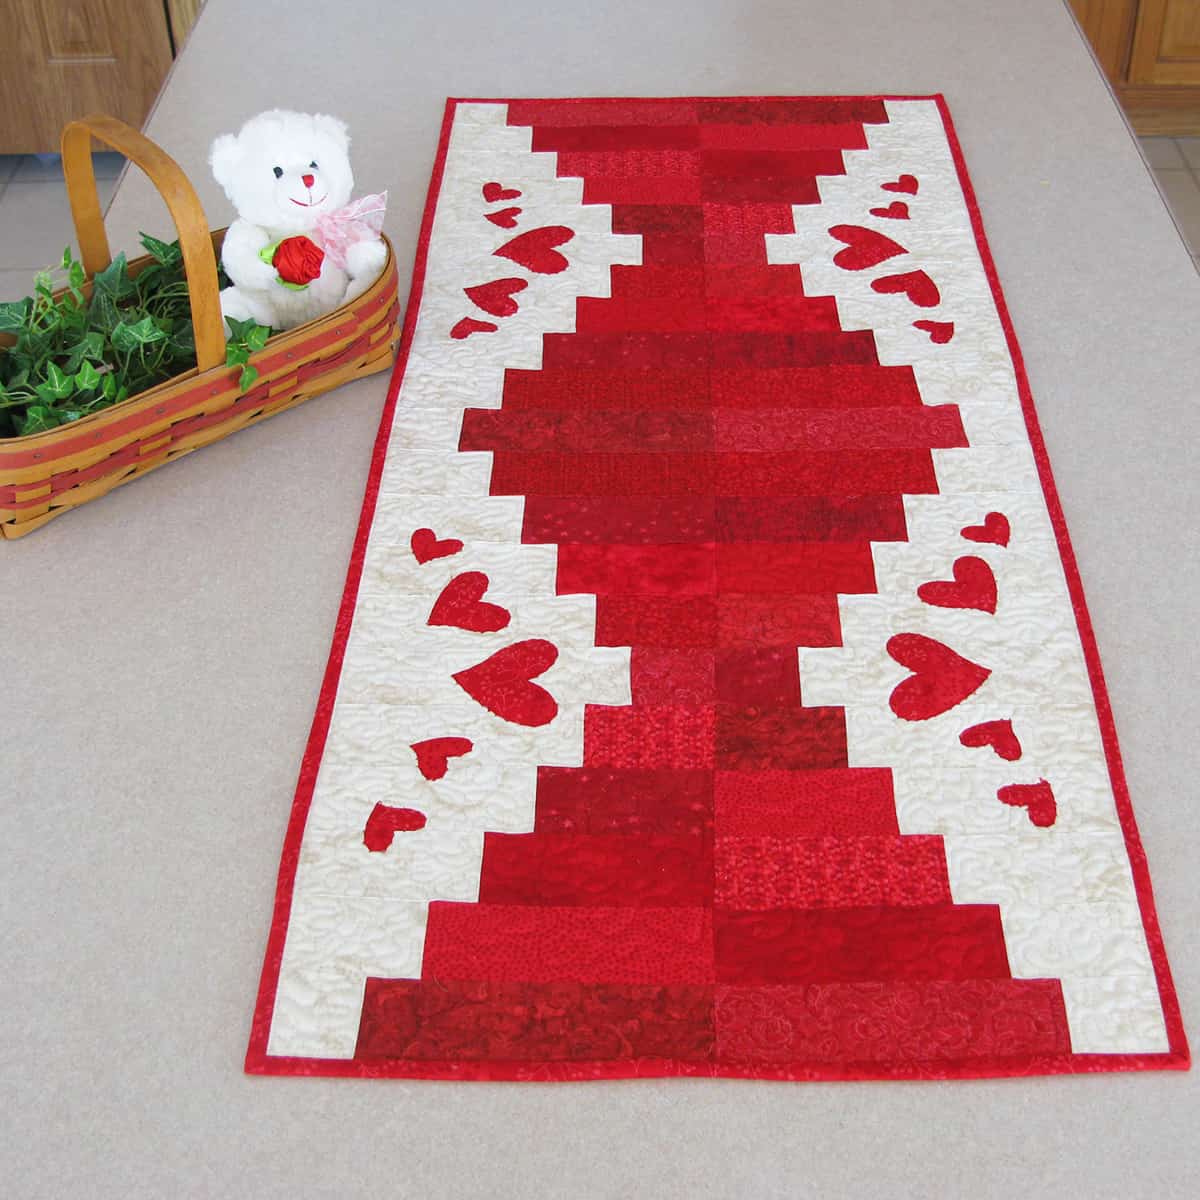 Piano Keys table runner in red and white with heart applique